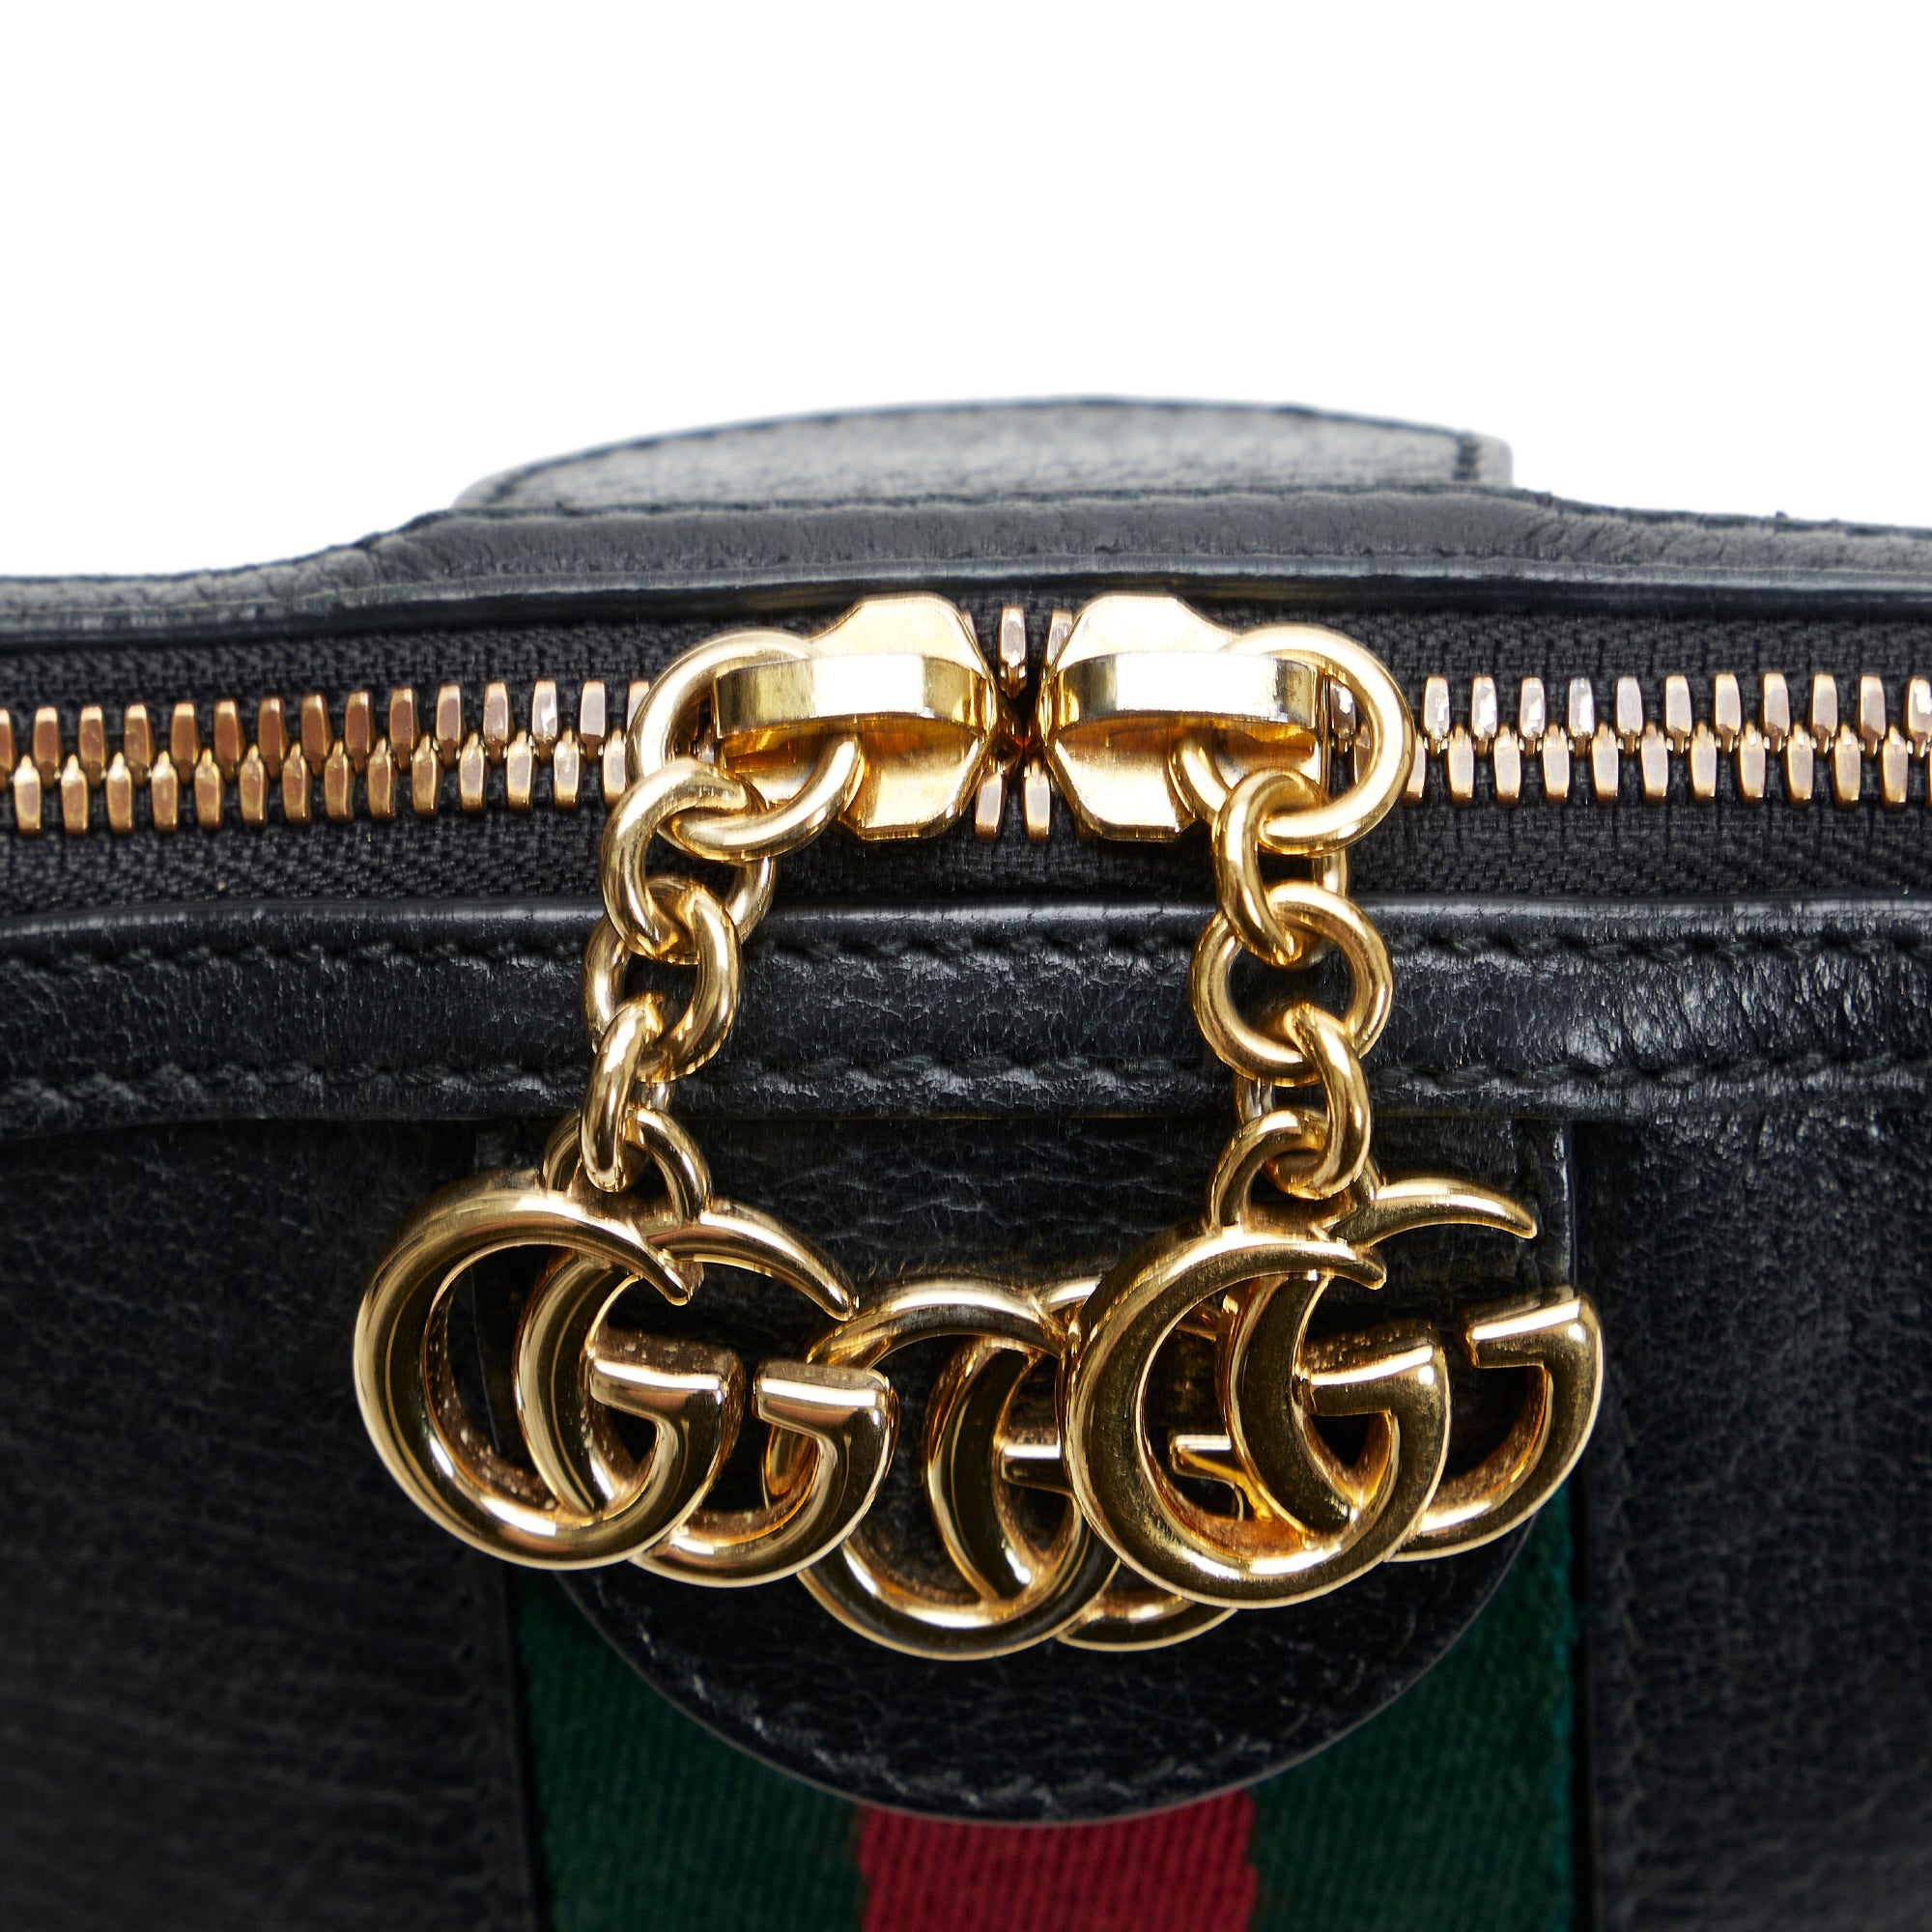 GUCCI Ophidia GG Small Suede Shoulder Bag Black 499621 - 15% OFF